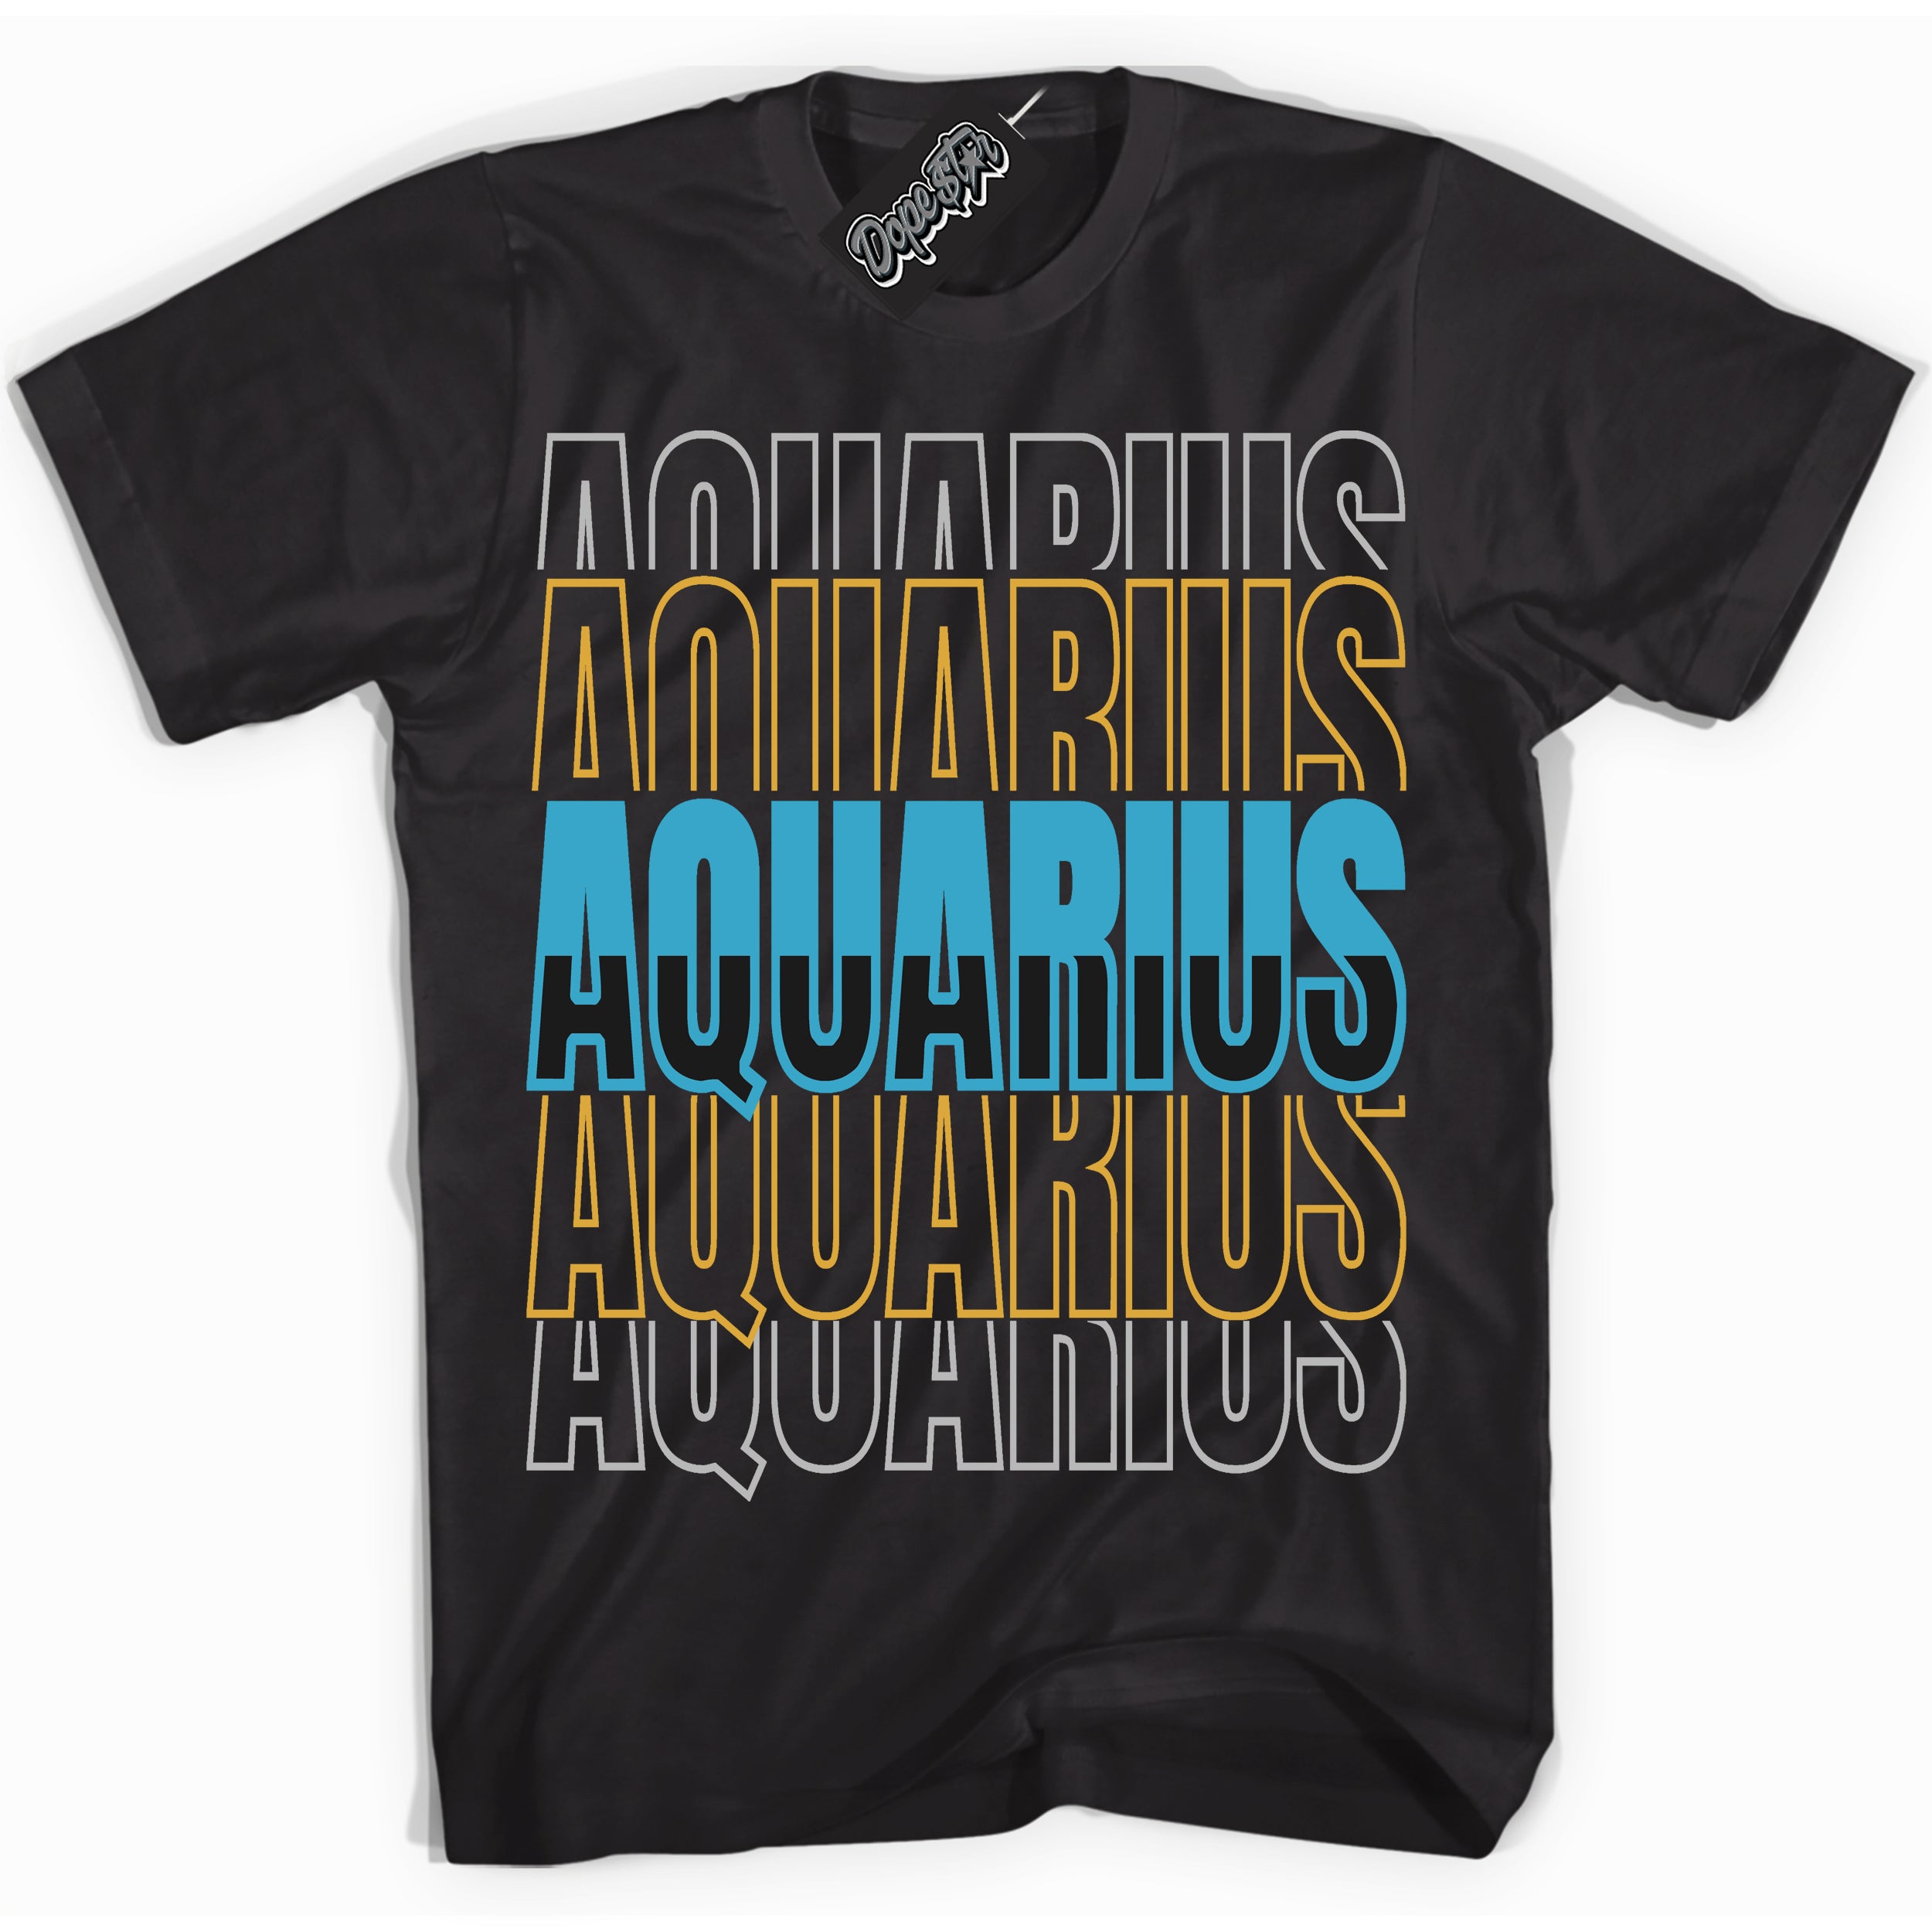 Cool Black Shirt with “ Aquarius” design that perfectly matches Aqua 5s Sneakers.